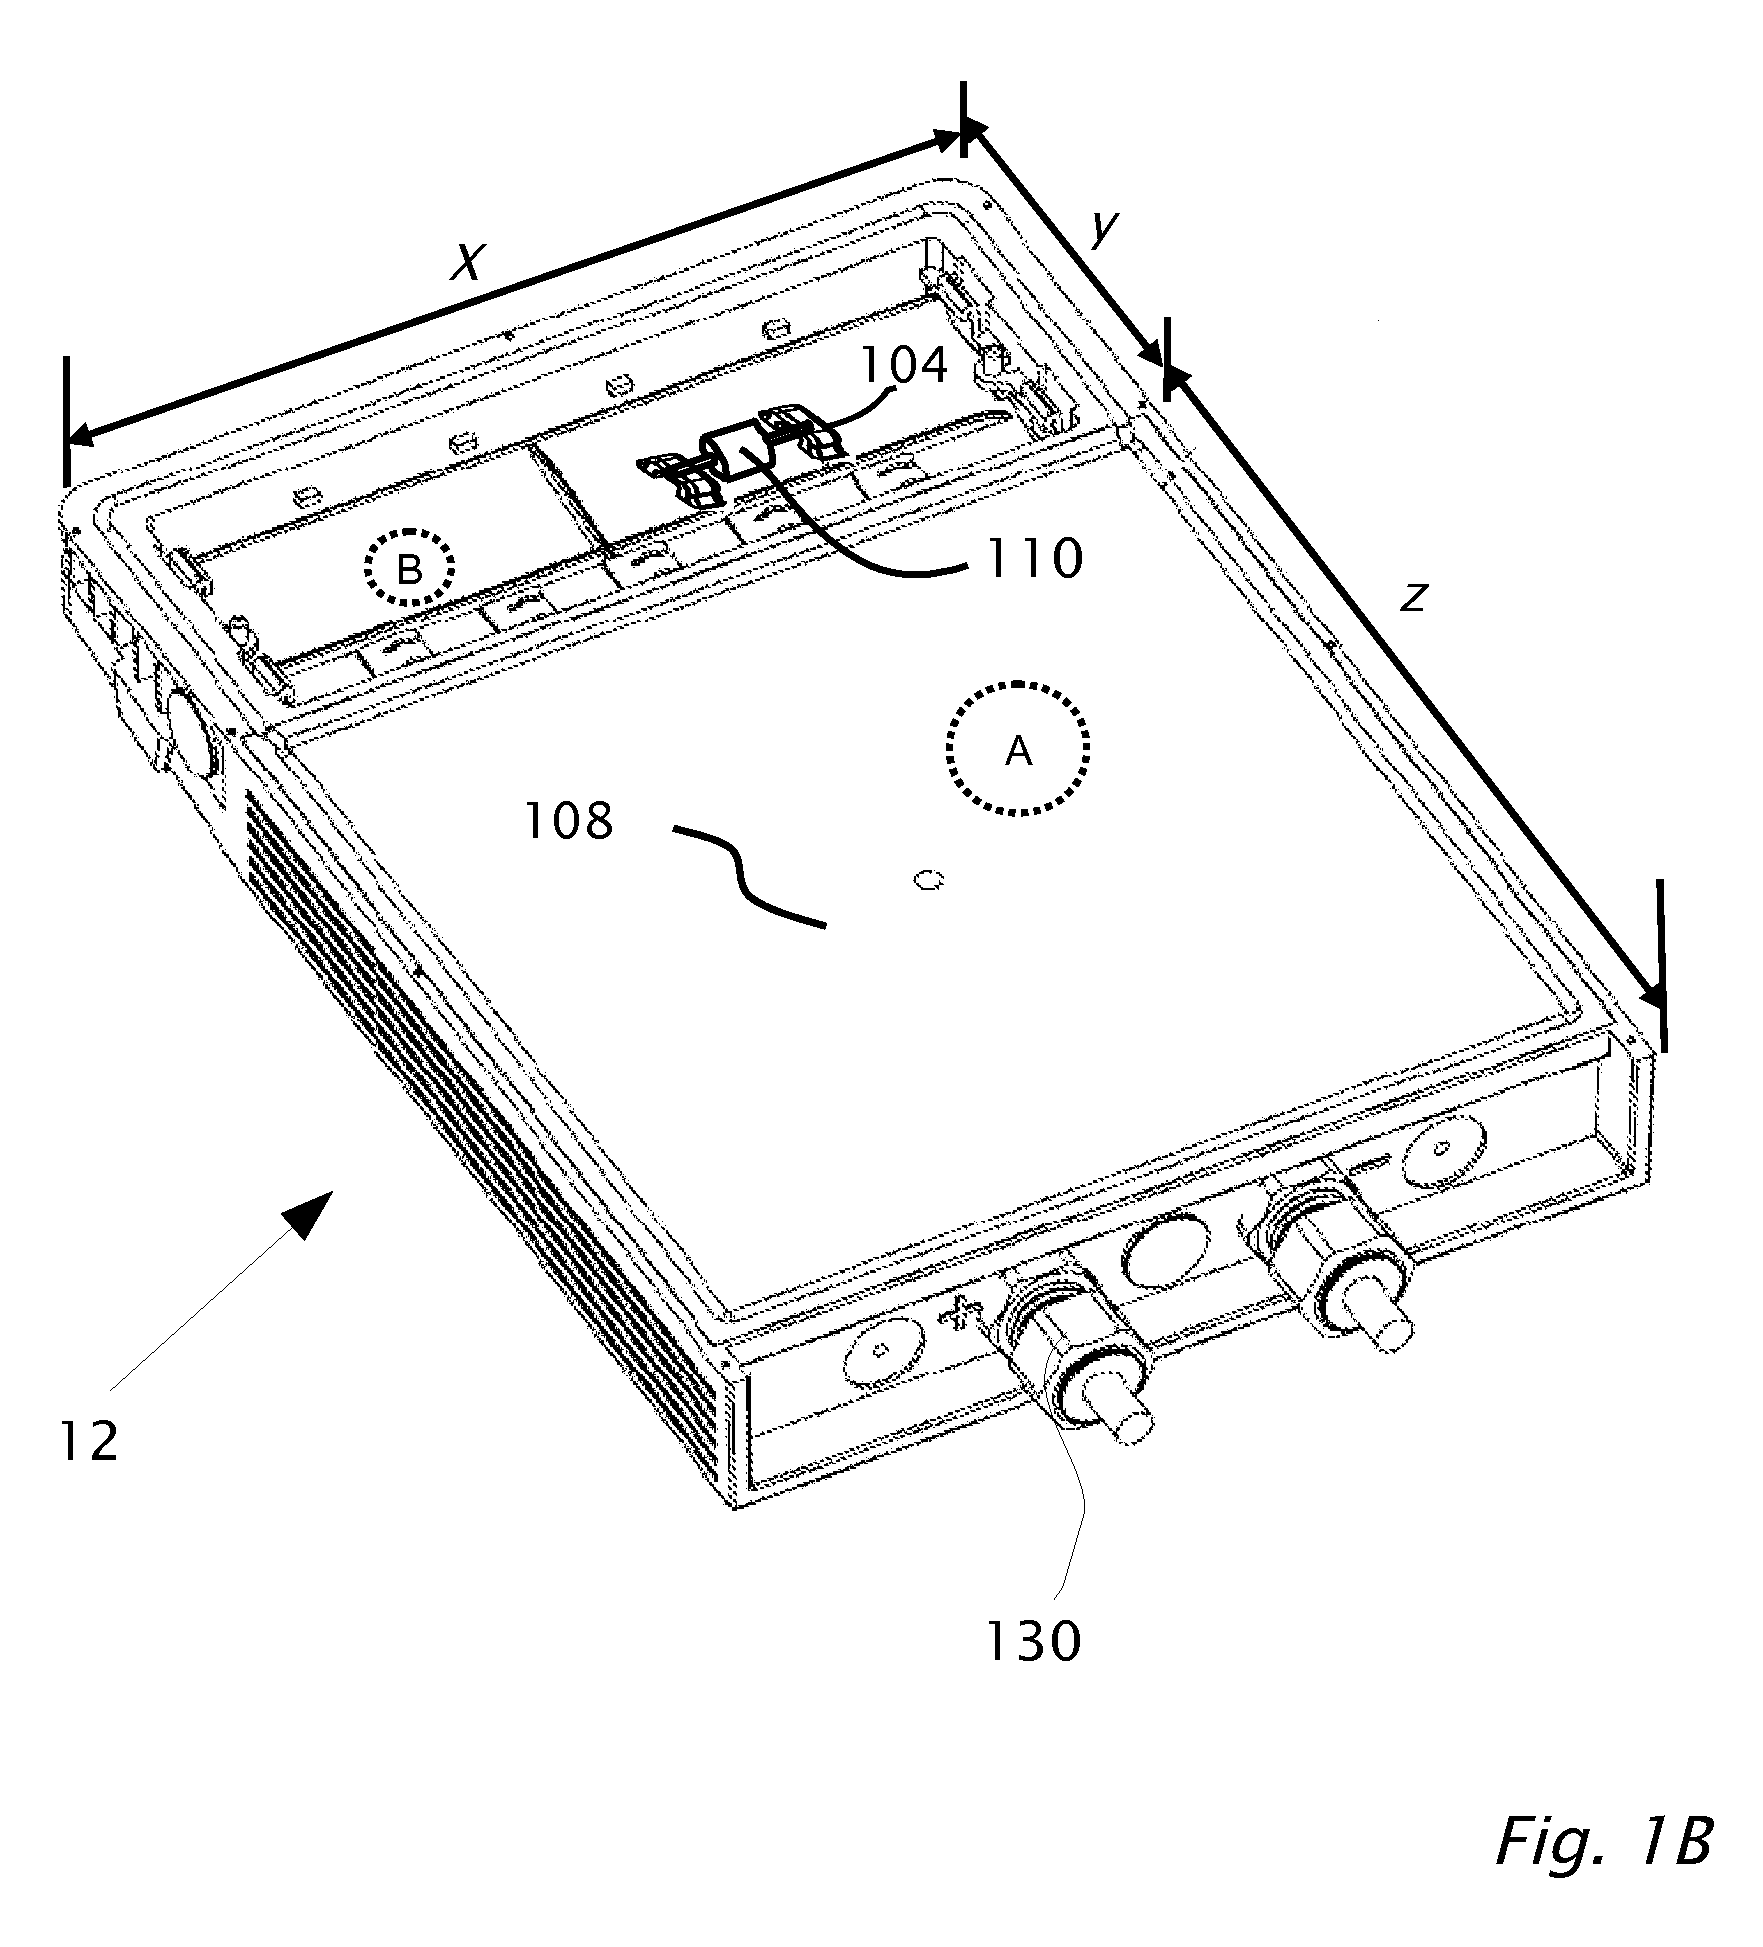 Electrically isolated heat dissipating junction box